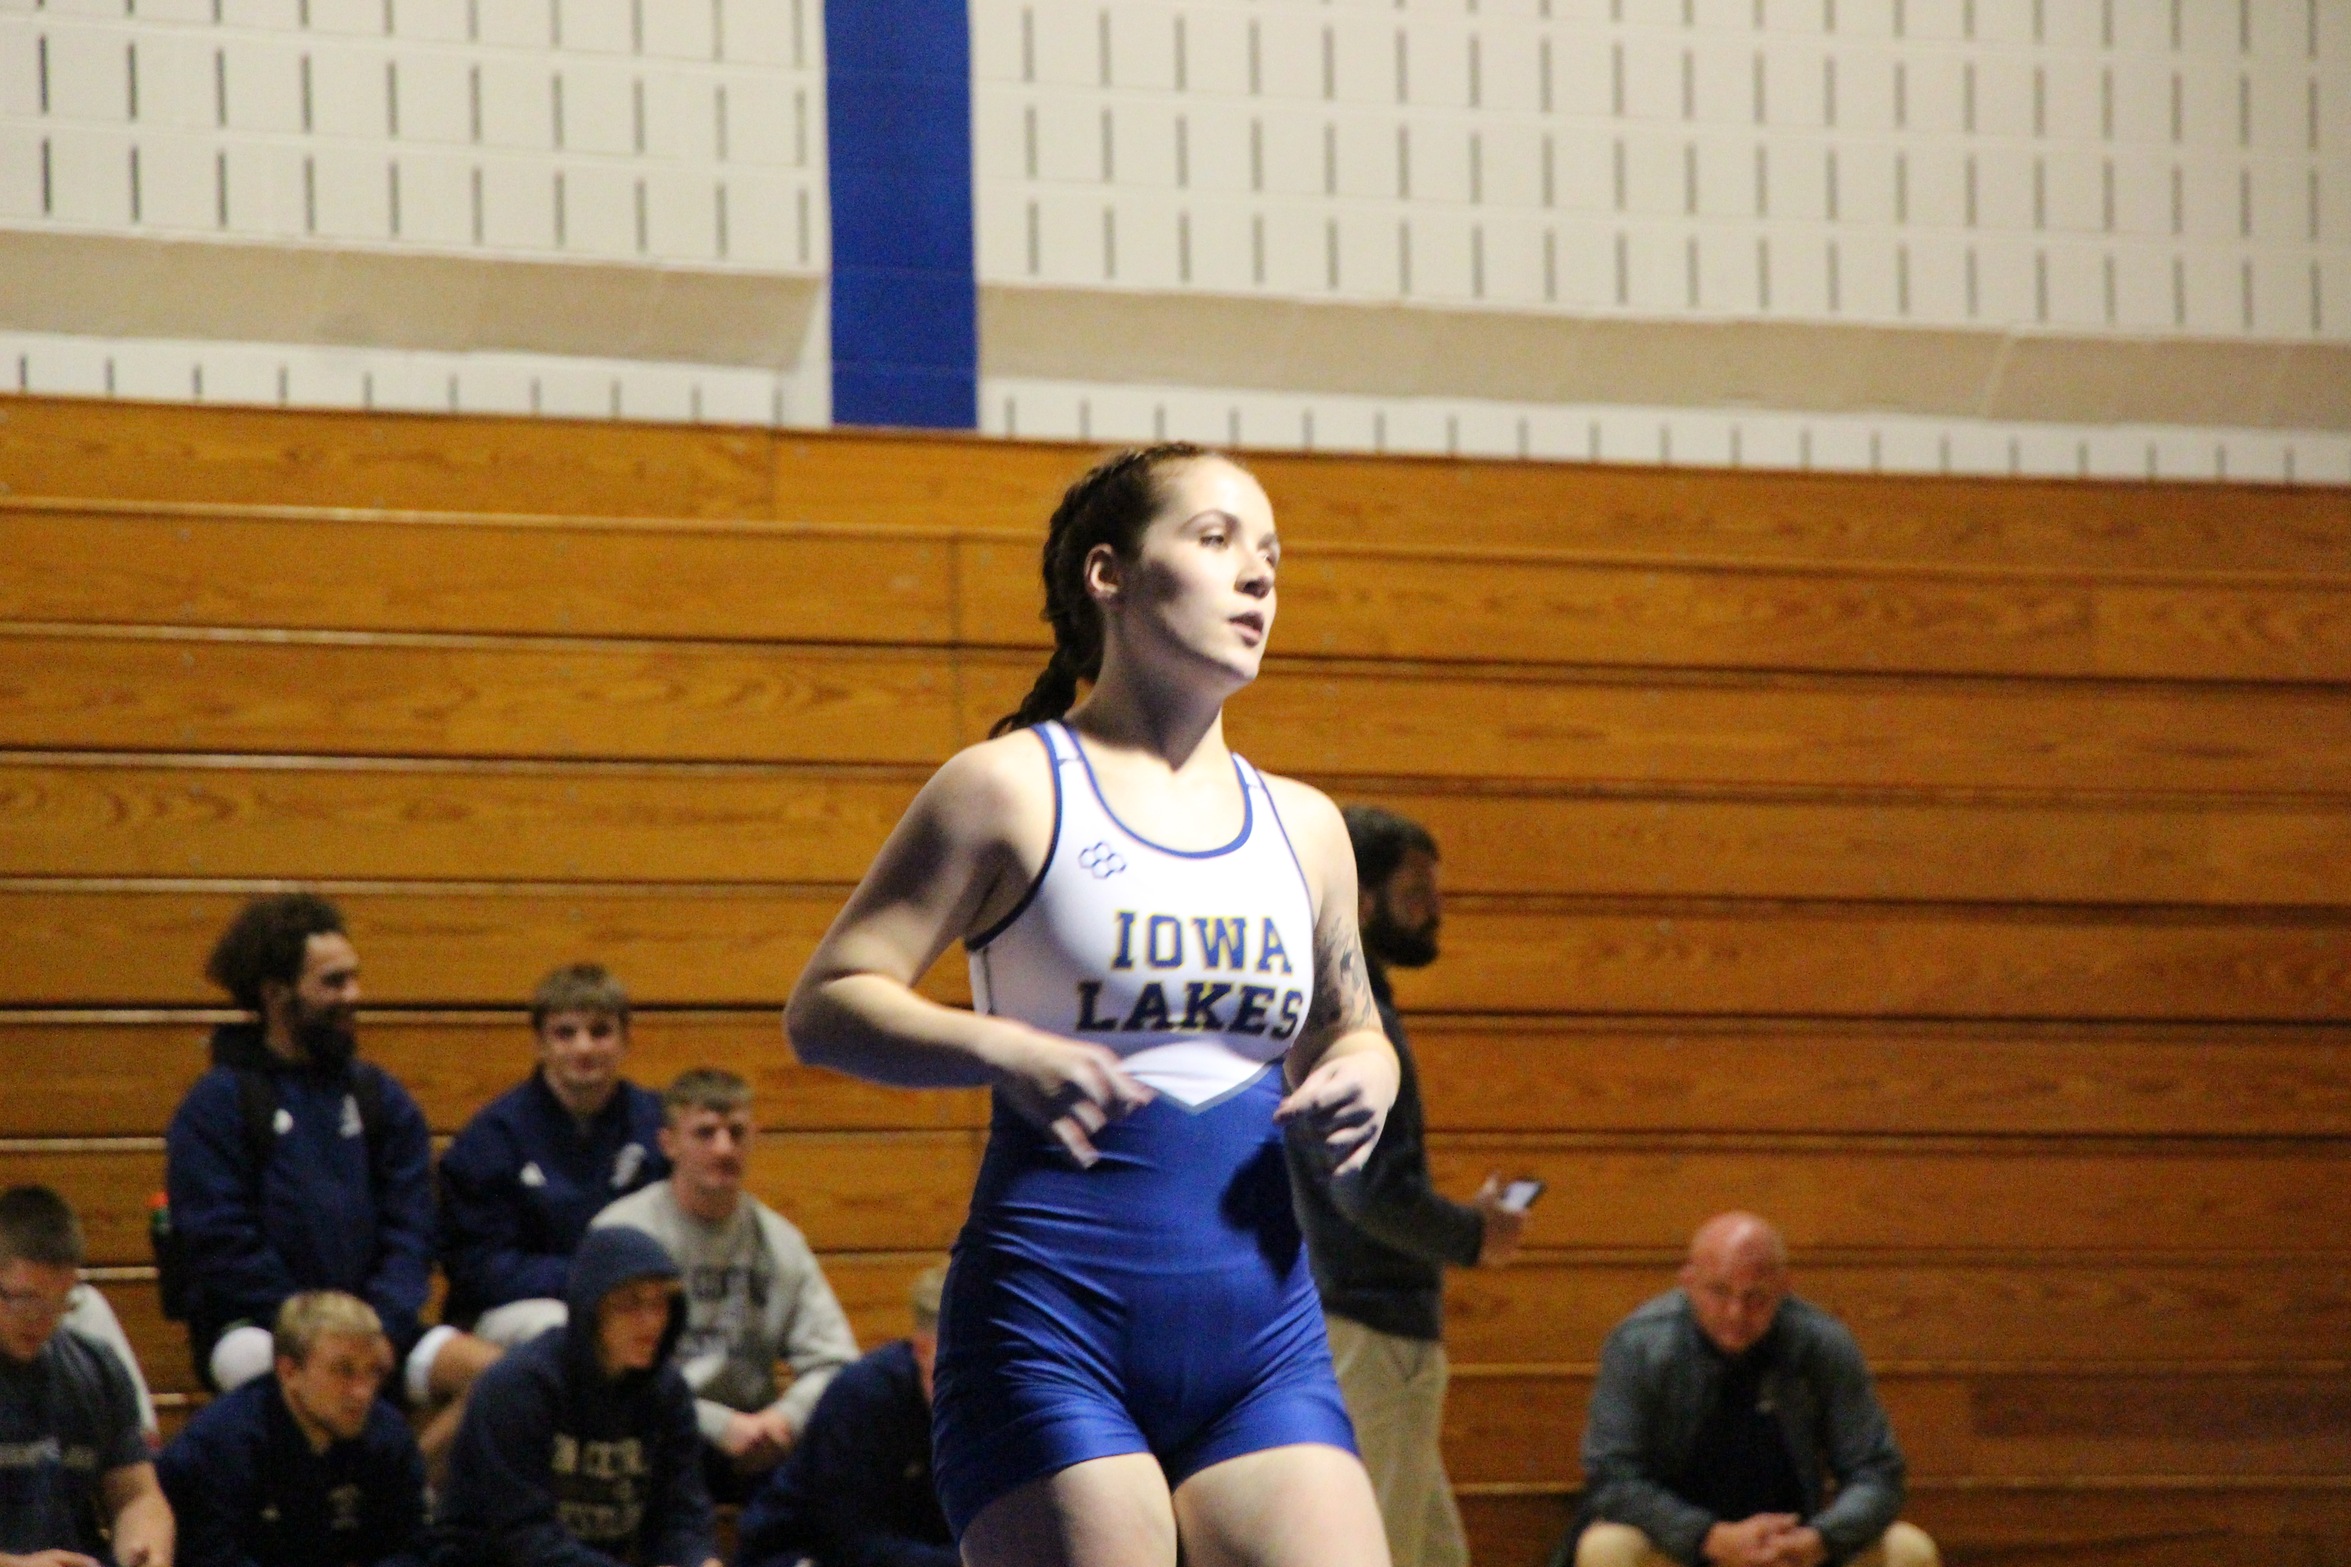 Gomez, Galindo, Highlight Highly Contested Conference Dual